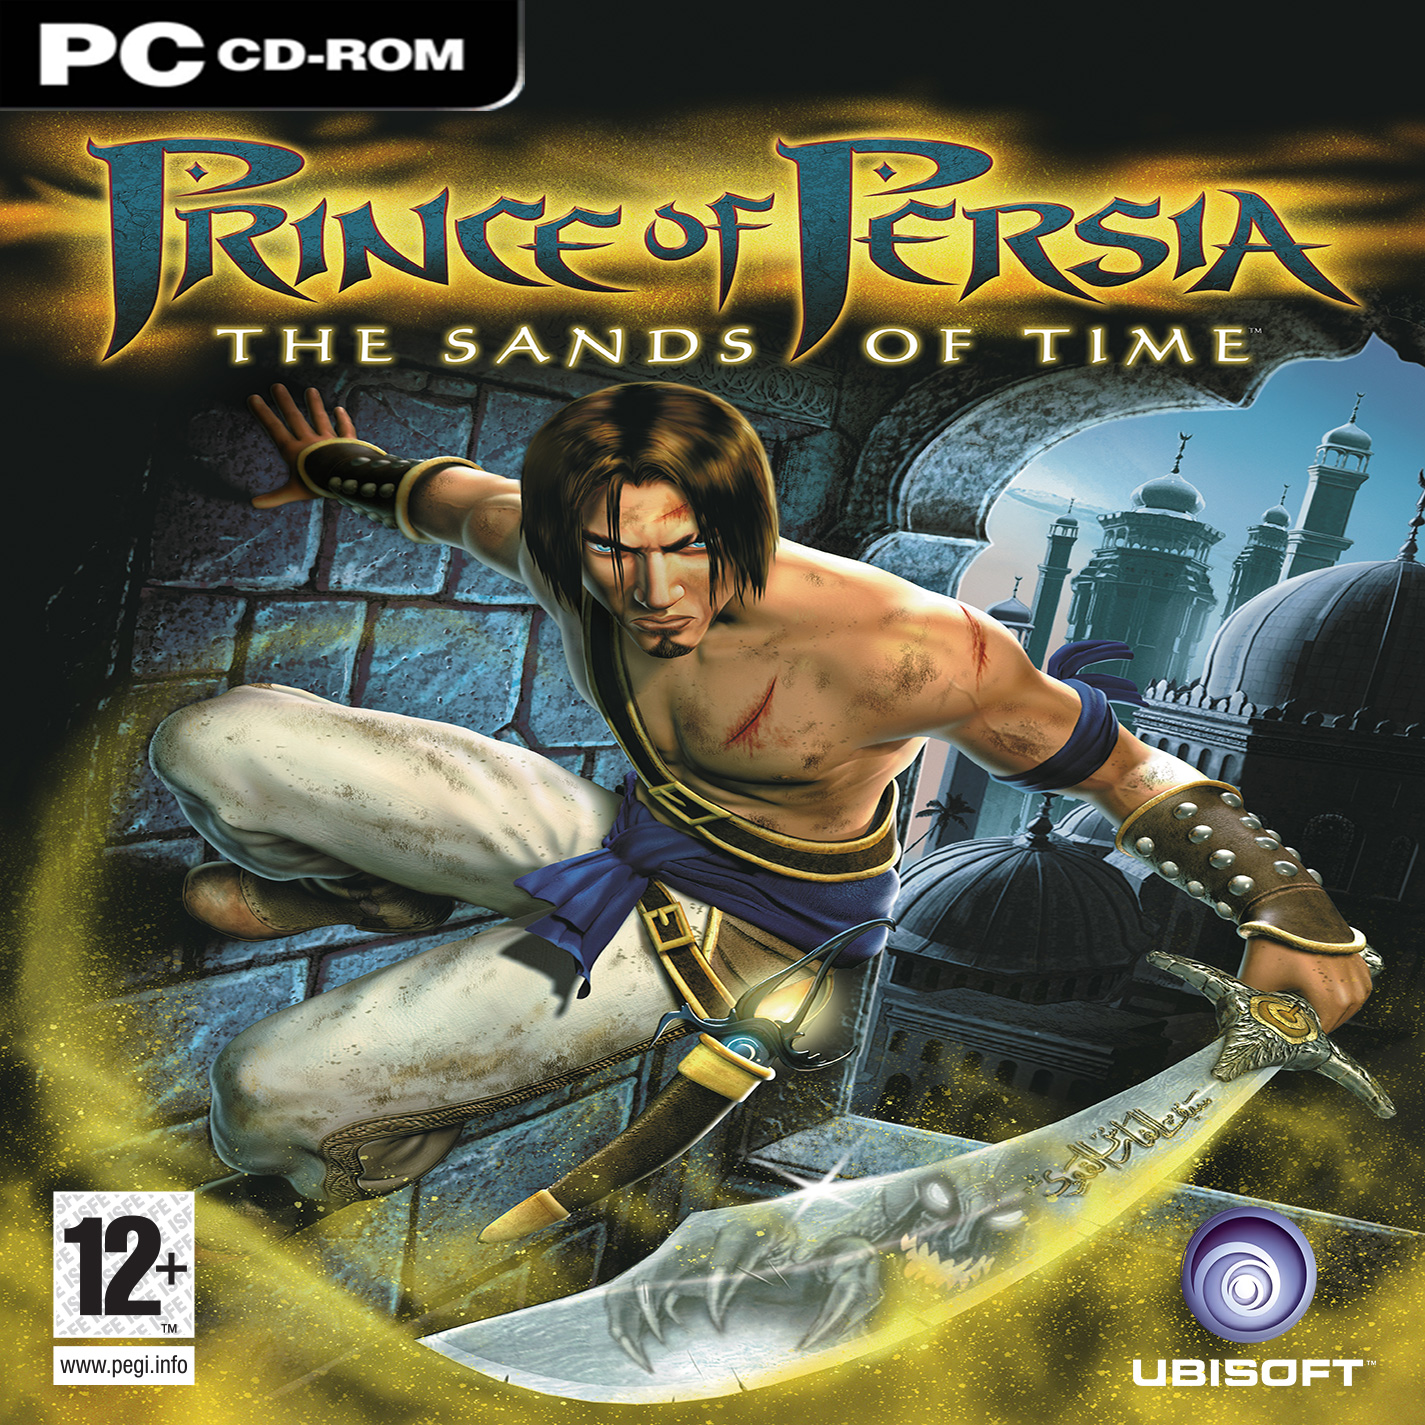 Prince of Persia: The Sands of Time - predn CD obal